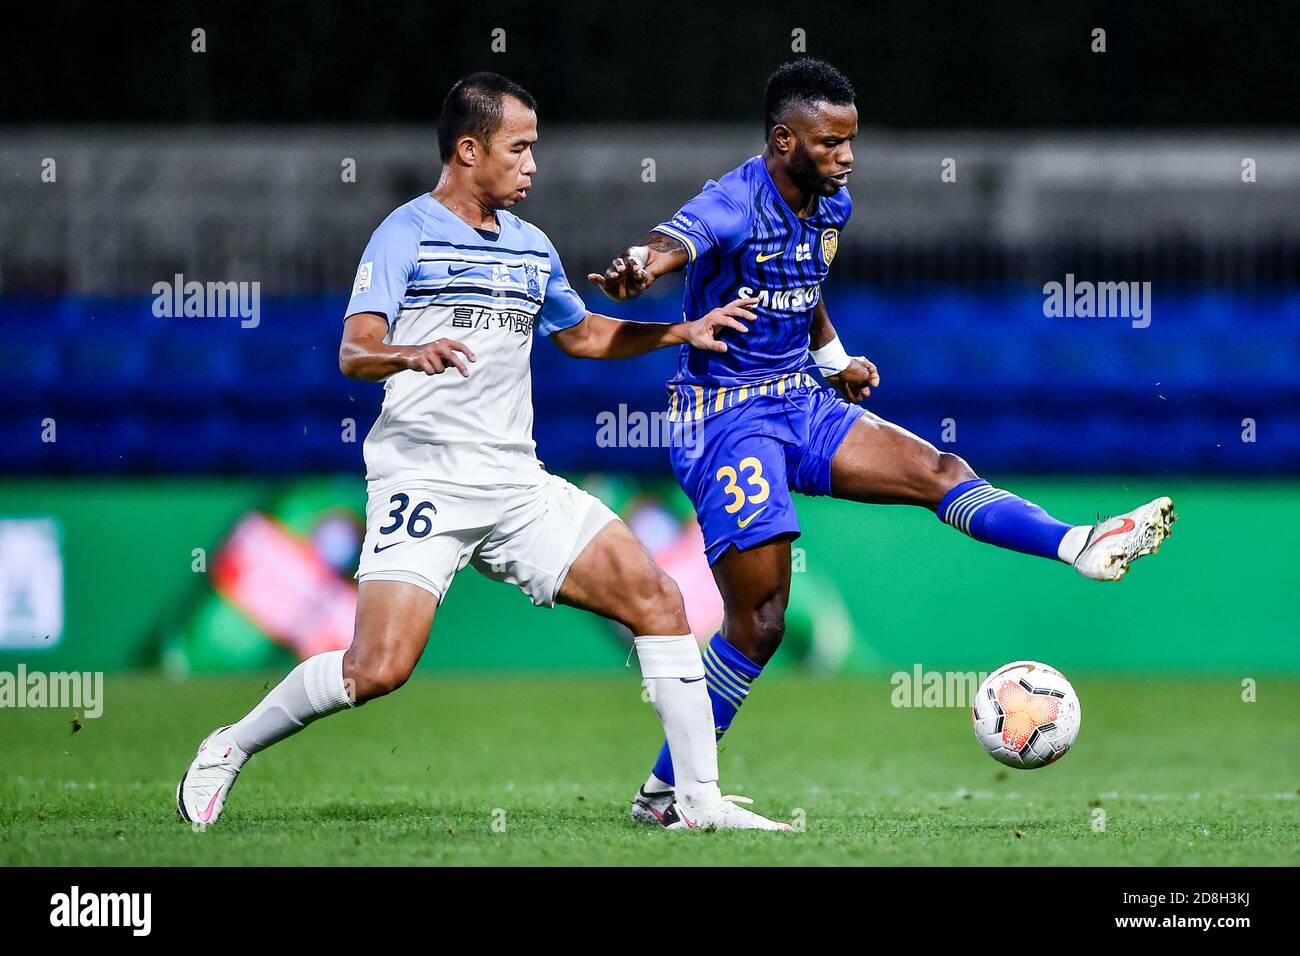 Ghanaian football player Mubarak Wakaso of Jiangsu Suning F.C., right, protects the ball during the eleventh-round match of 2020 Chinese Super League Stock Photo